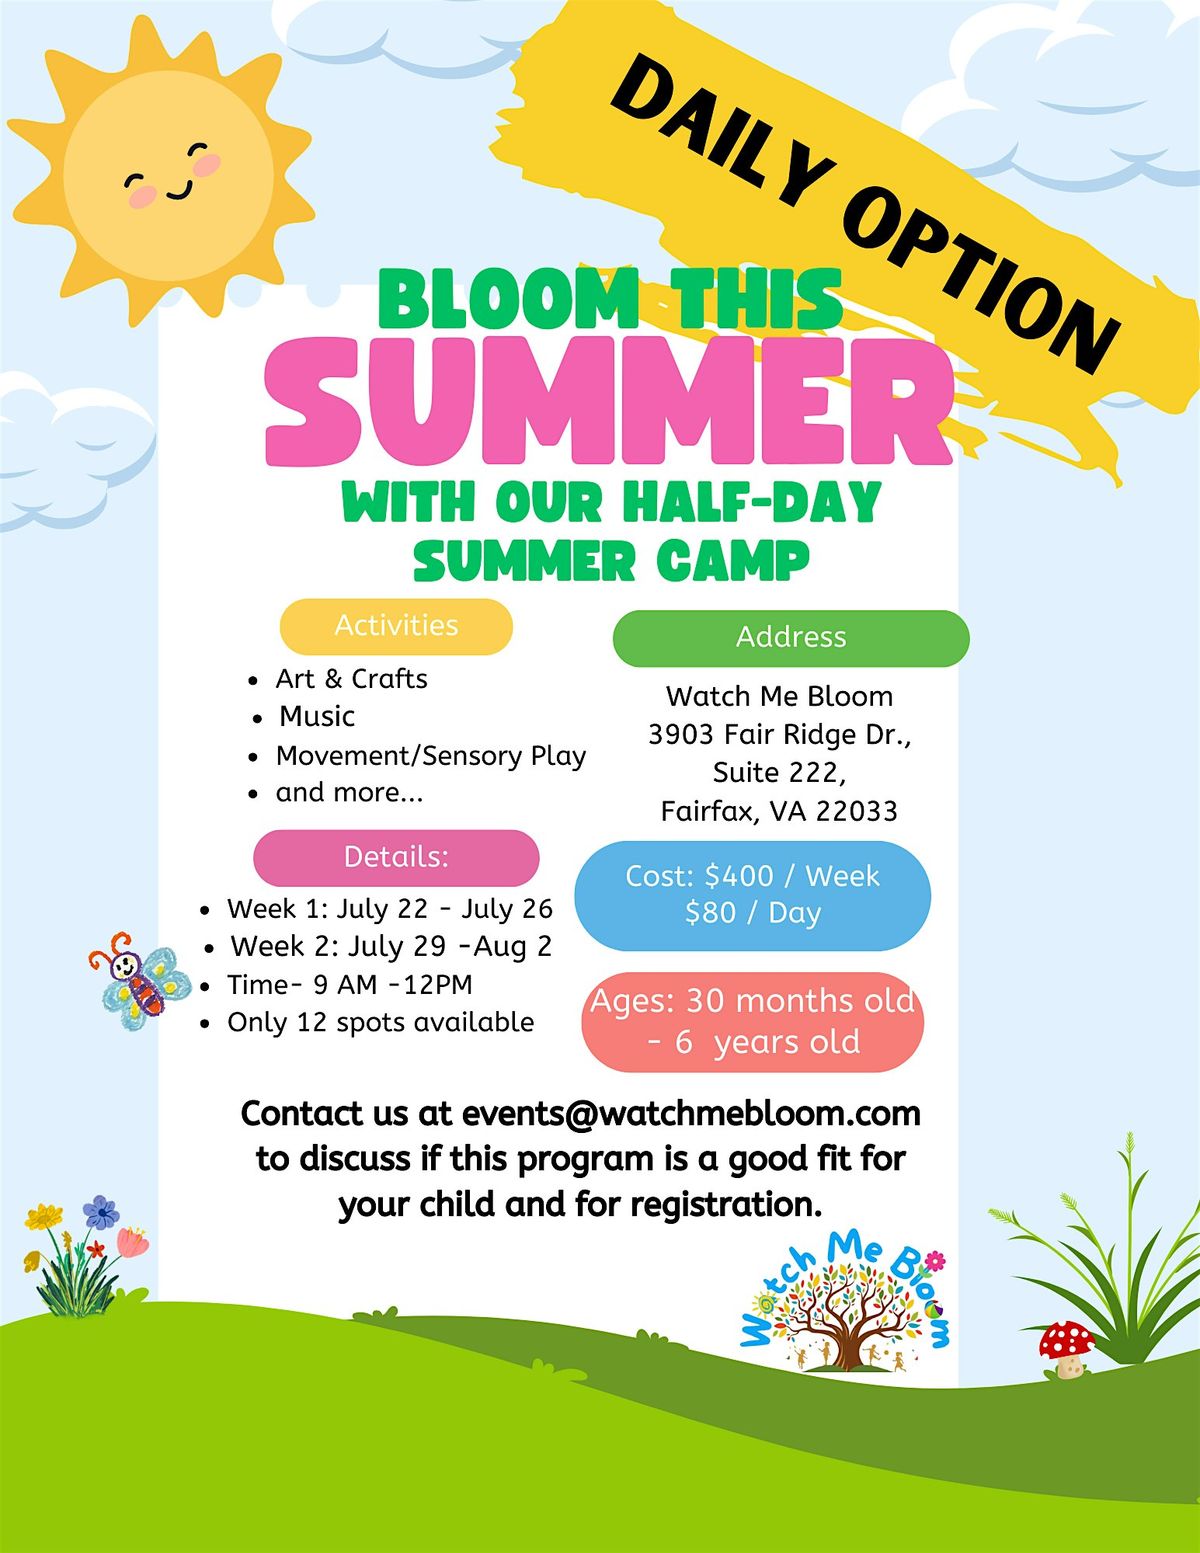 Half-Day Summer Camp led by Speech-Language Pathologists and OTs ($80\/day)